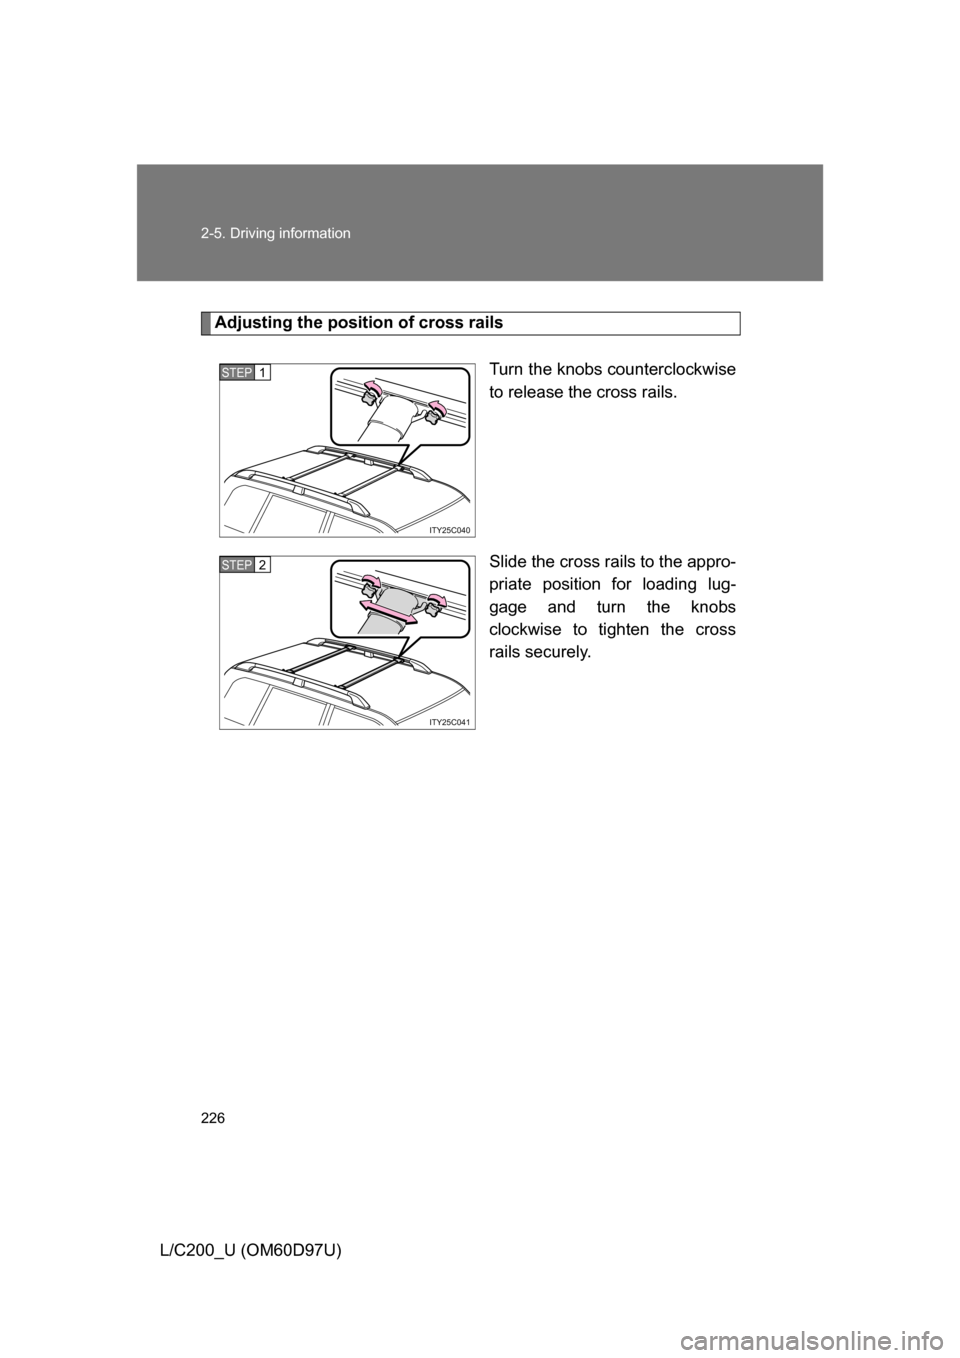 TOYOTA LAND CRUISER 2009 J200 Owners Manual 226 2-5. Driving information
L/C200_U (OM60D97U)
Adjusting the position of cross railsTurn the knobs counterclockwise
to release the cross rails.
Slide the cross rails to the appro-
priate position fo